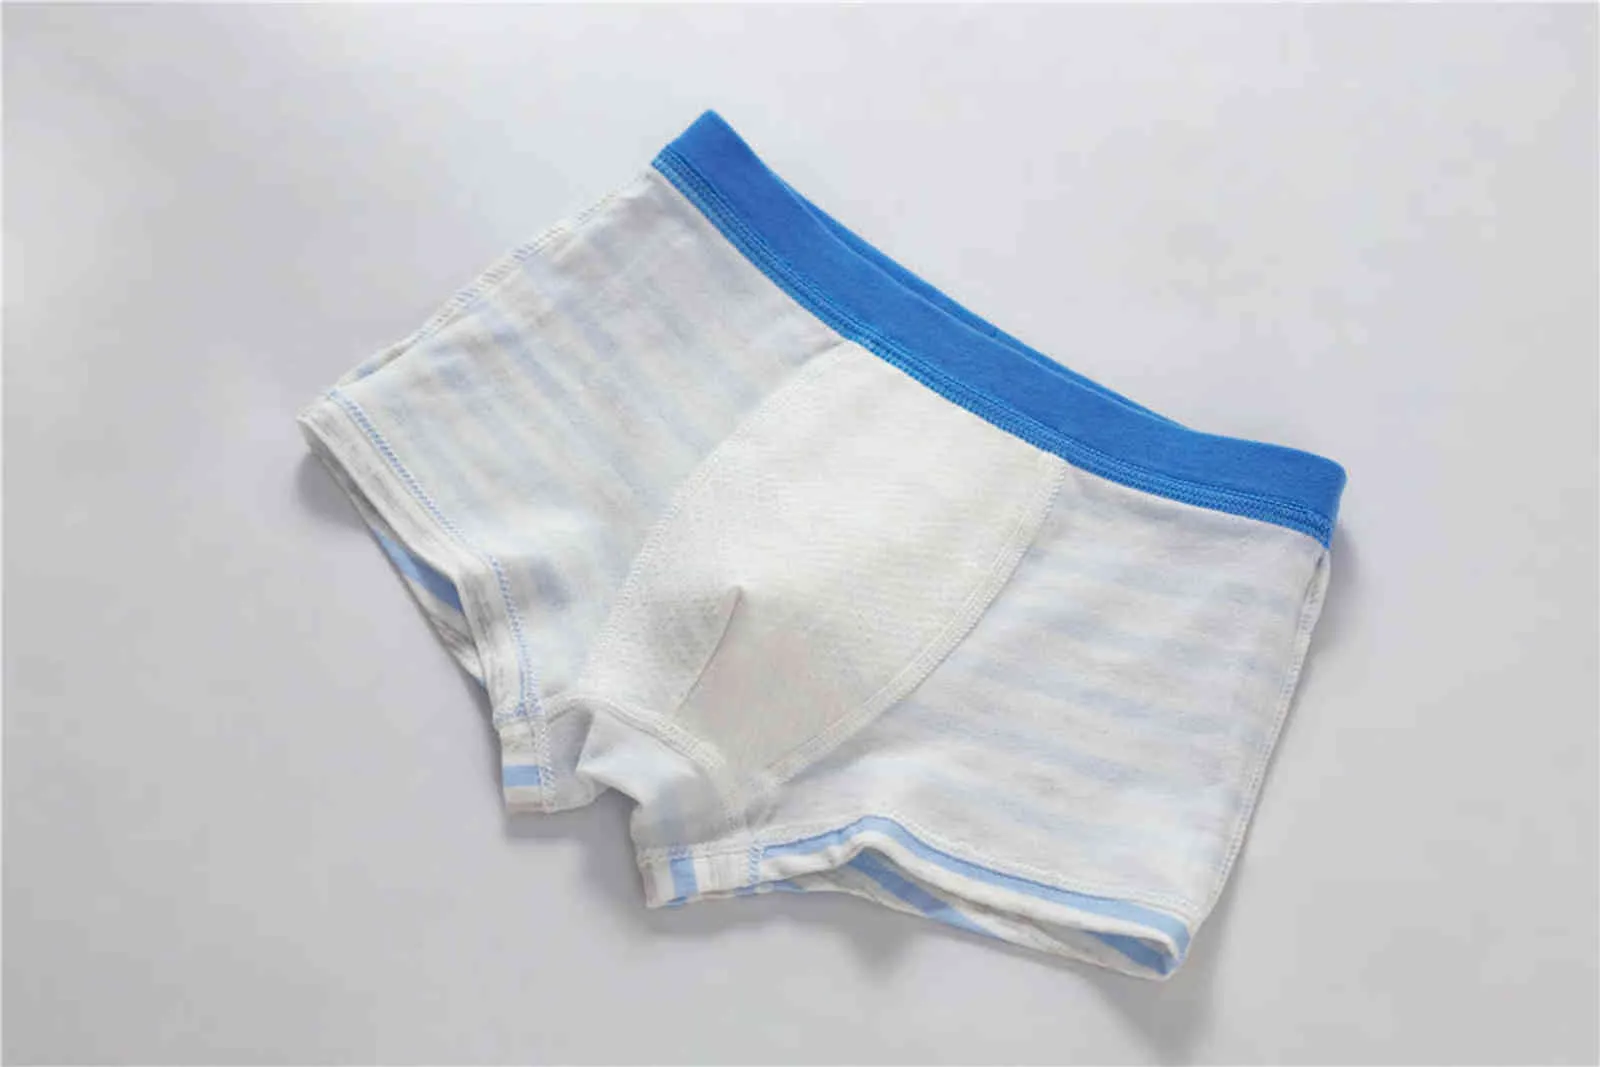 Blue Striped Cotton Cotton Briefs Mens For Boys Kids Shorts Underpanties  For Ages 3 14 OMGosh 211122 From Kong06, $11.6